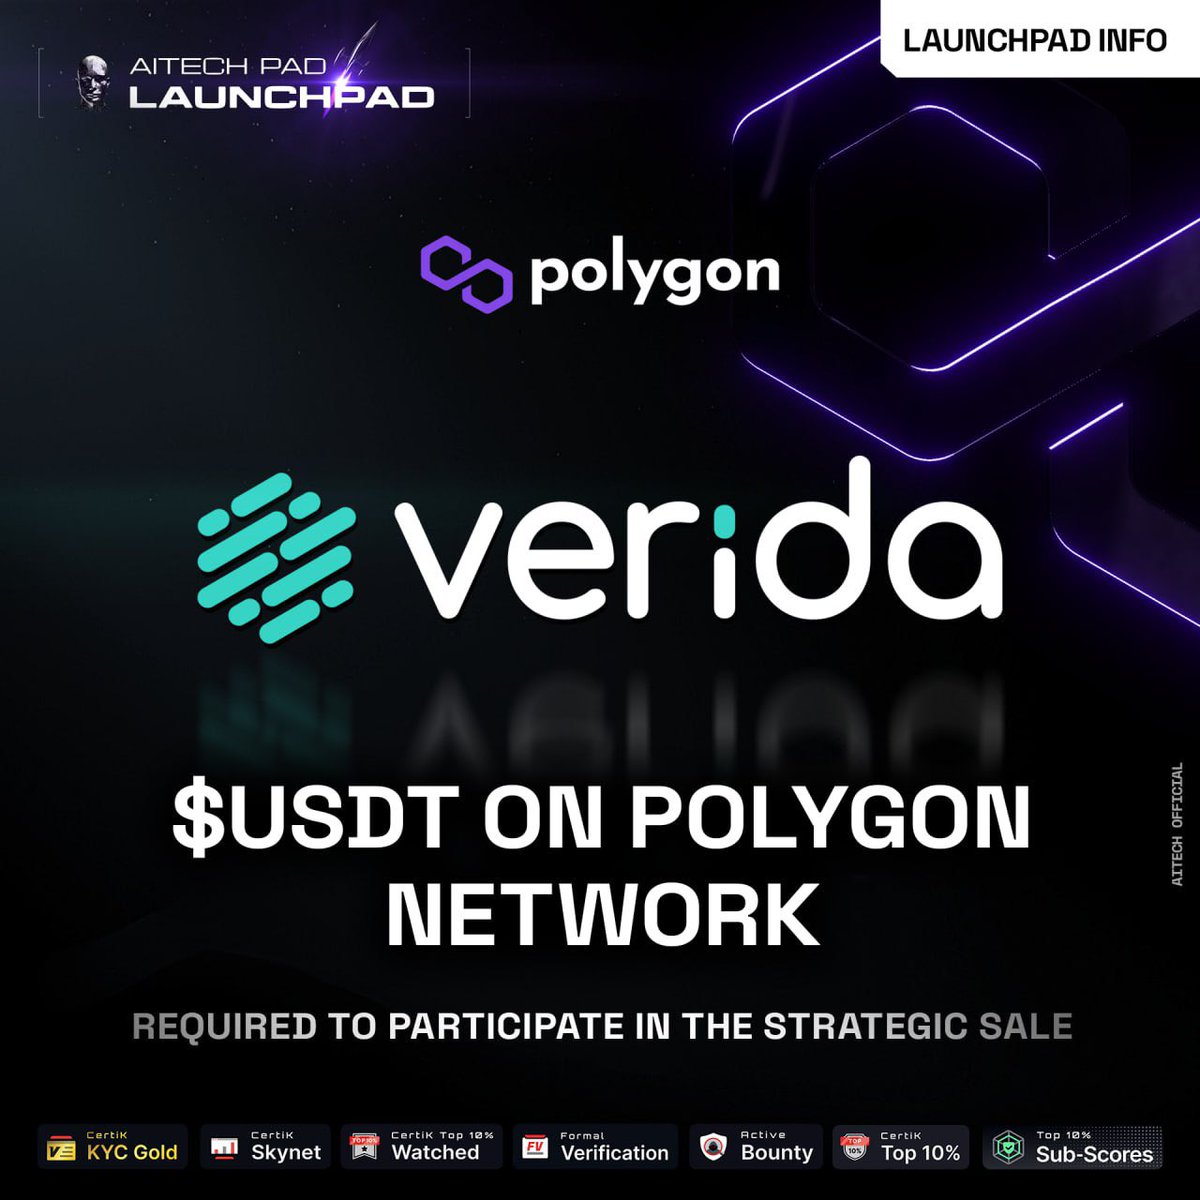 🔥 Verida on AITECH Pad!

⚠️ We would like to inform all participants, as Verida is on the Polygon Network, you will require $USDT on the Polygon Network to participate in the upcoming sale, and require Matic to cover the gas fees. 

👨🏻‍💻 Register Here 👉🏻 aitechpad.io/project/verida…